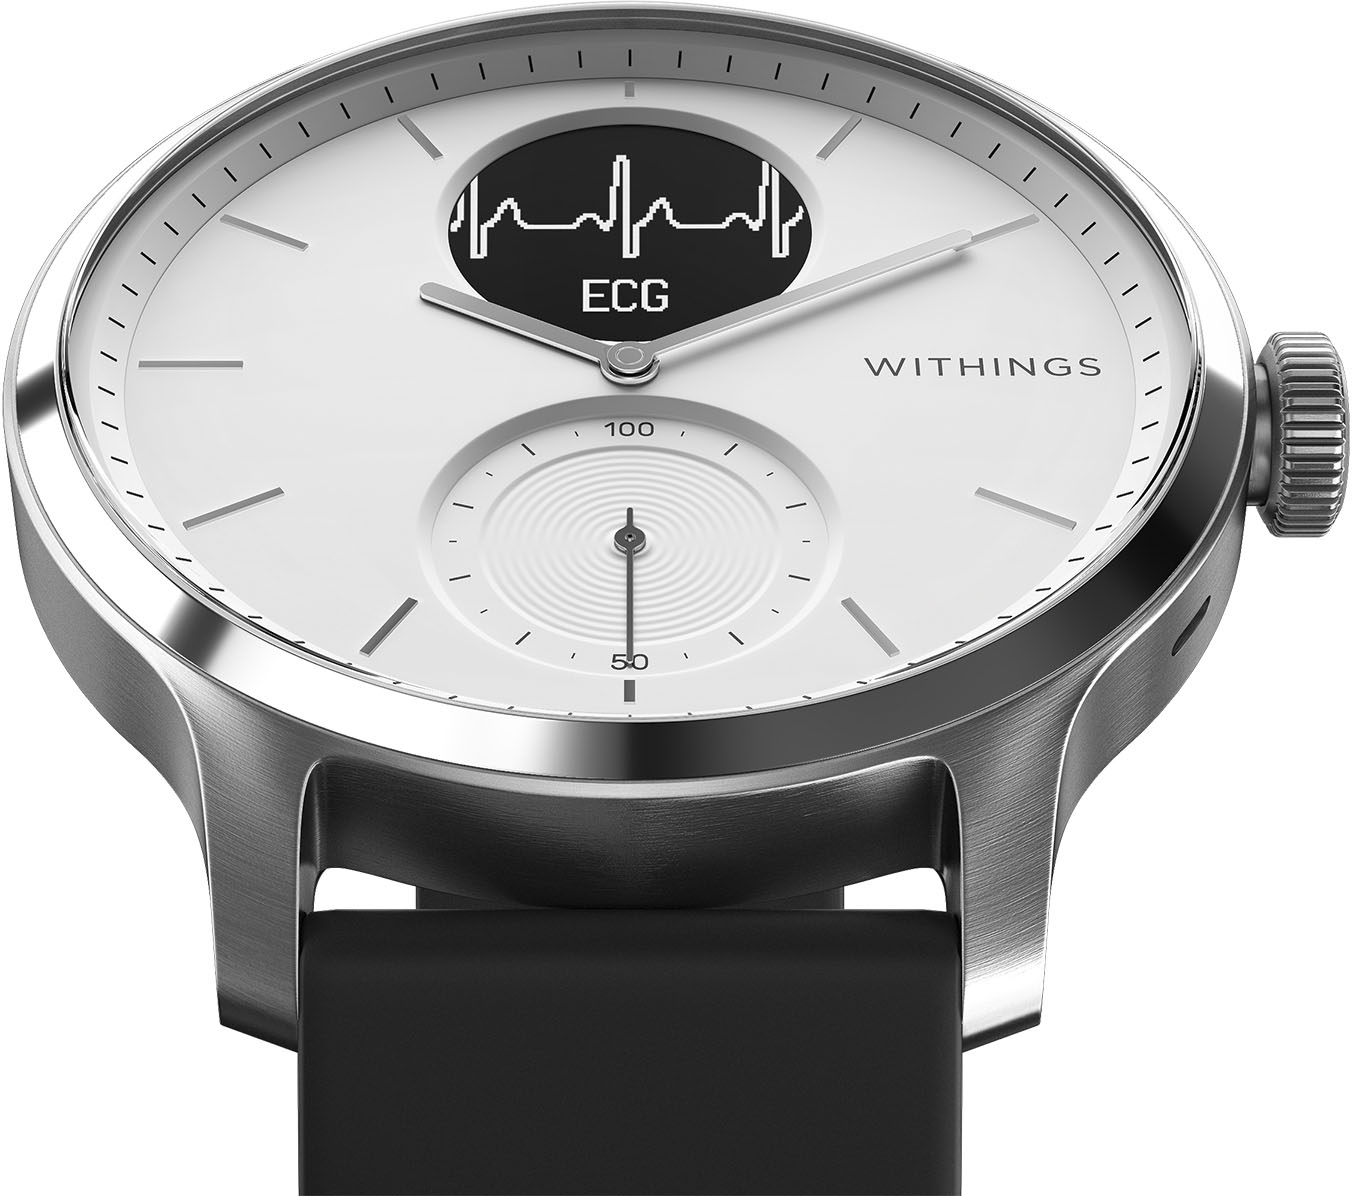 with oximeter Hybrid Buy Smartwatch HWA09-MODEL and SCANWATCH Best Withings Sliver 42mm 3-ALL-INT - ECG, heart rate